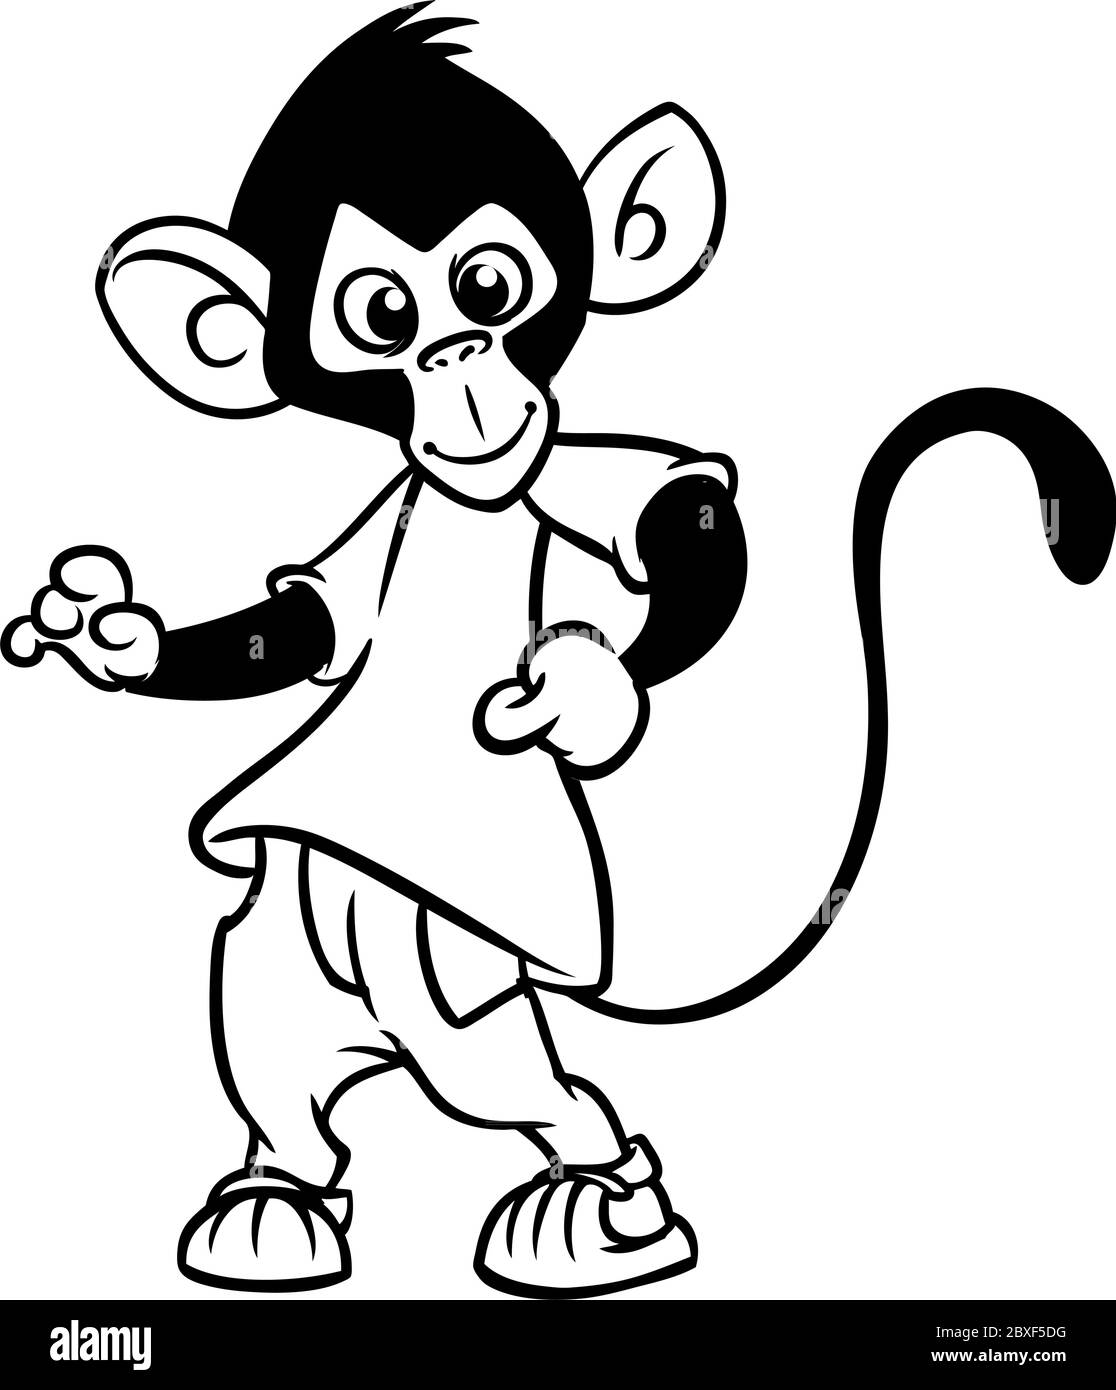 Cartoon monkey chimpanzee dancing. Vector illustration outlined. Design for coloring book Stock Vector